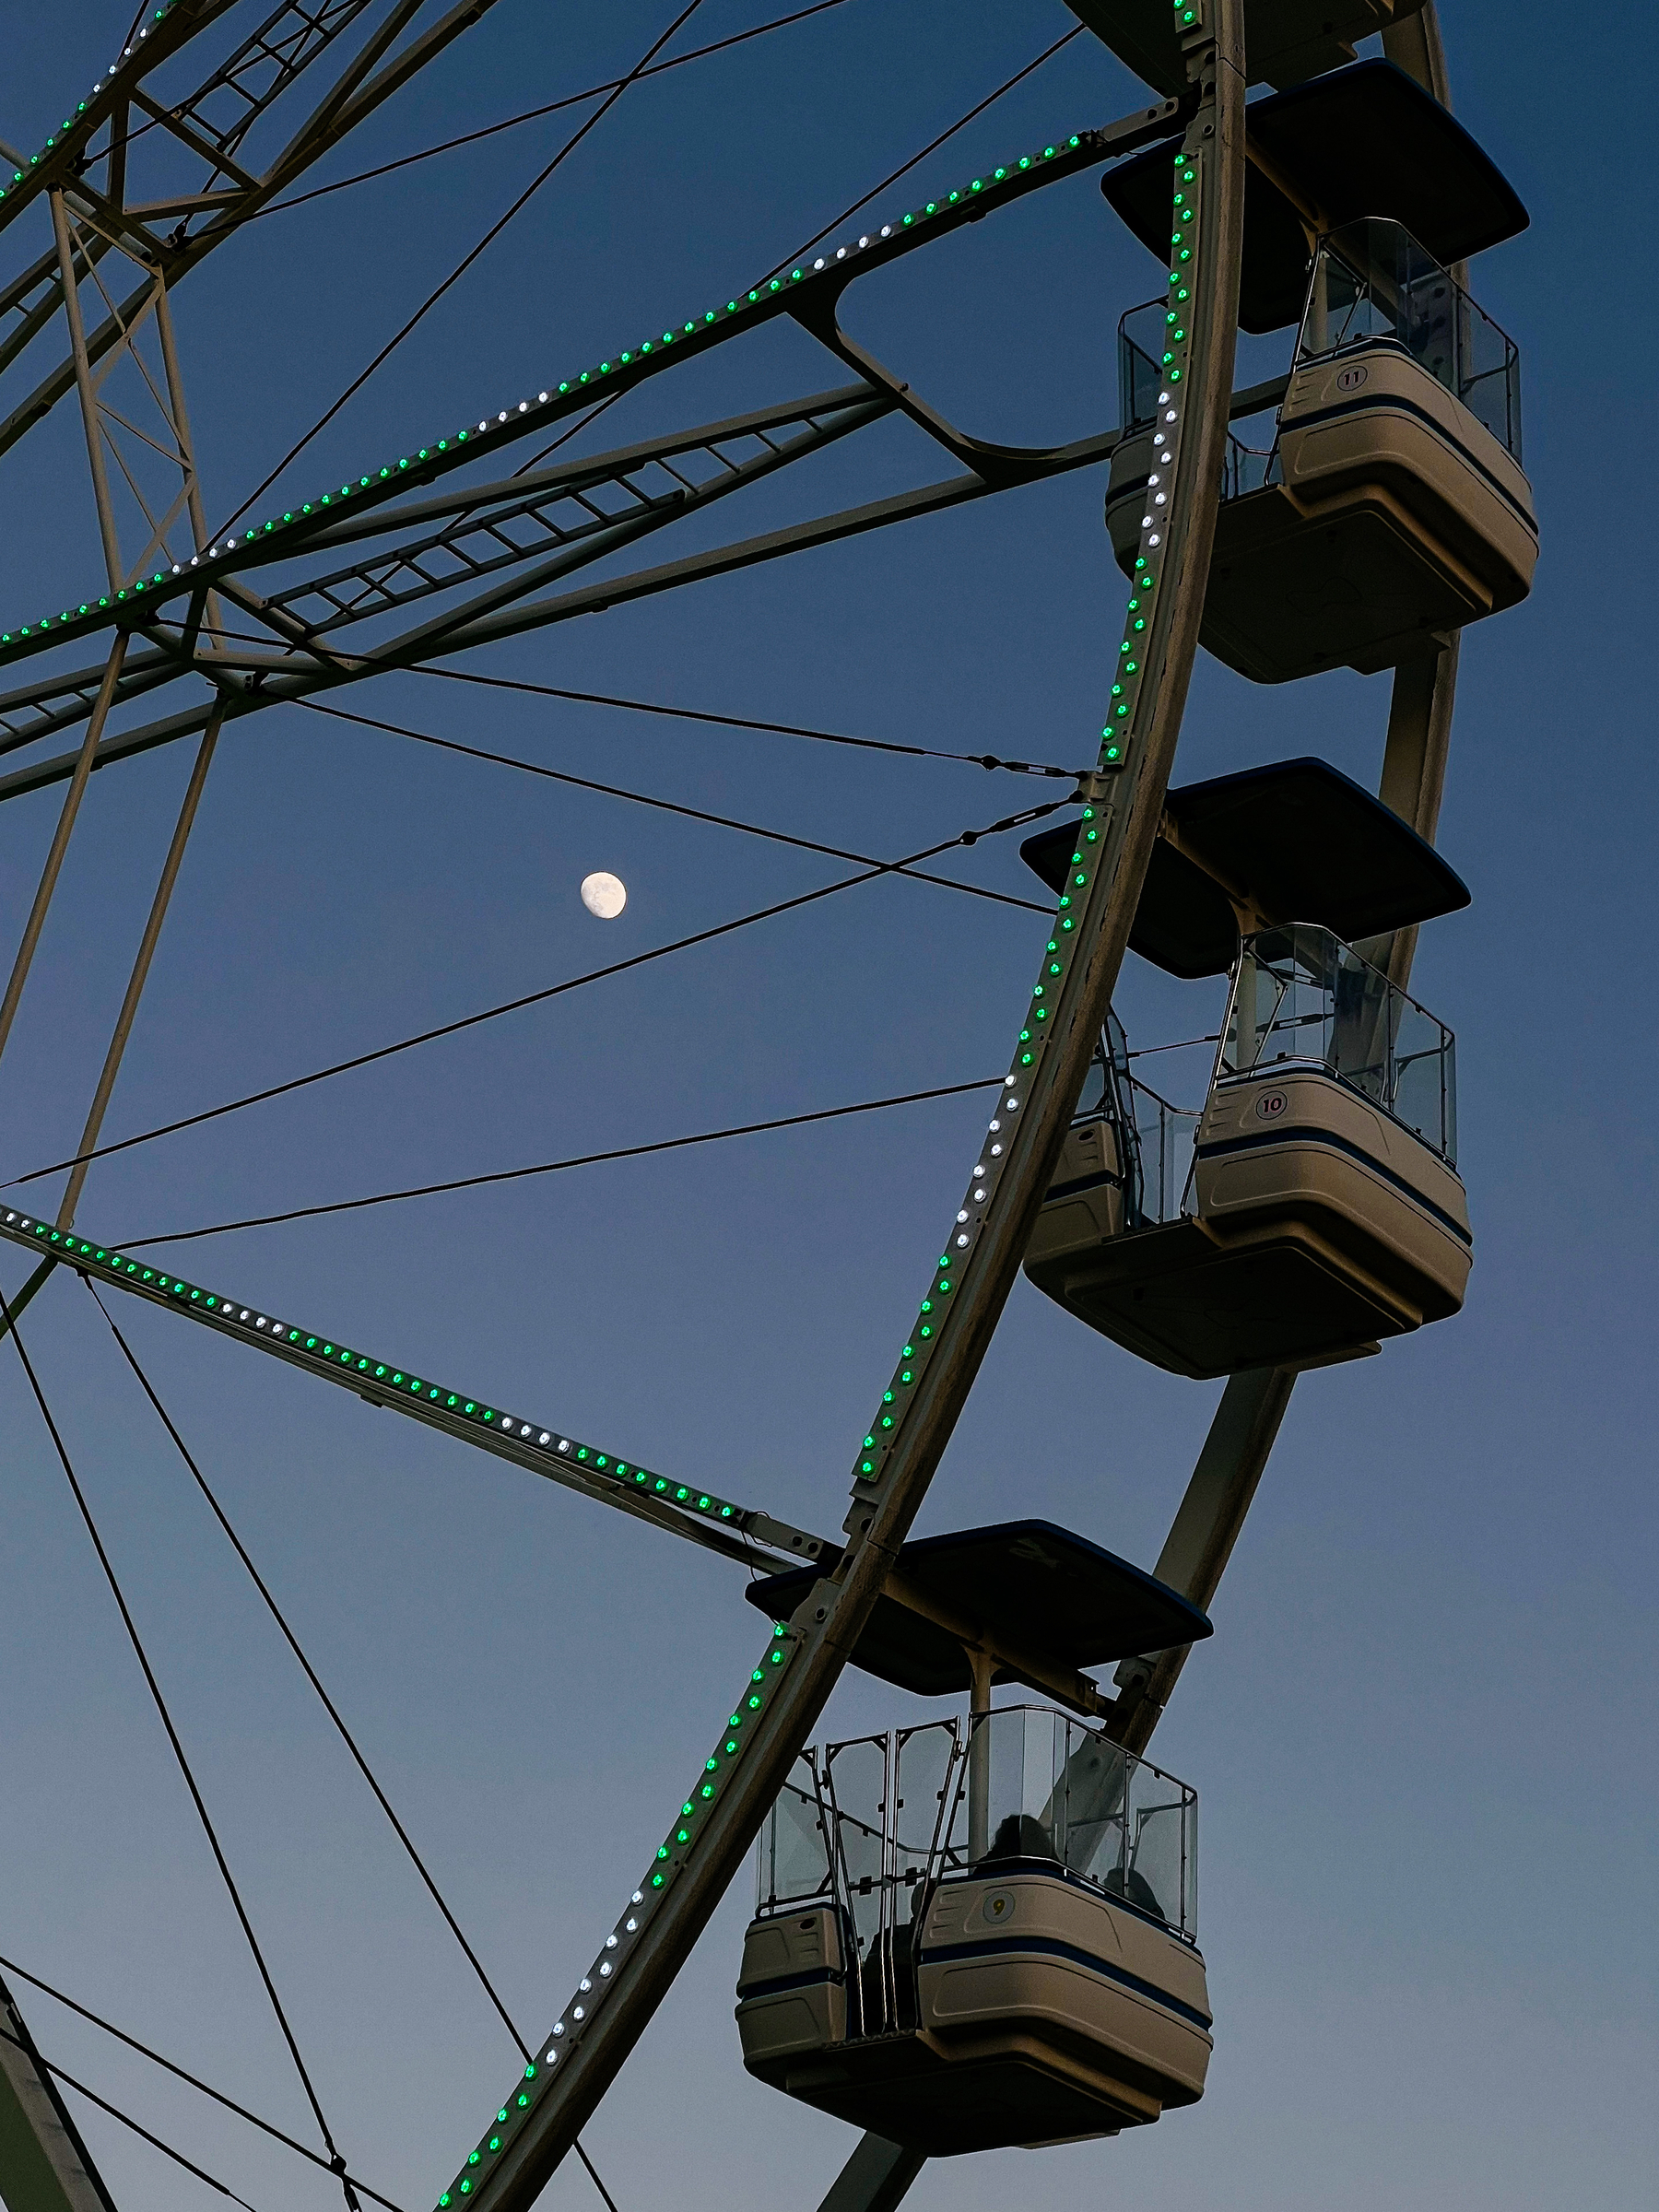 A Ferris wheel with illuminated green lights against a twilight sky, with the moon visible in the background.